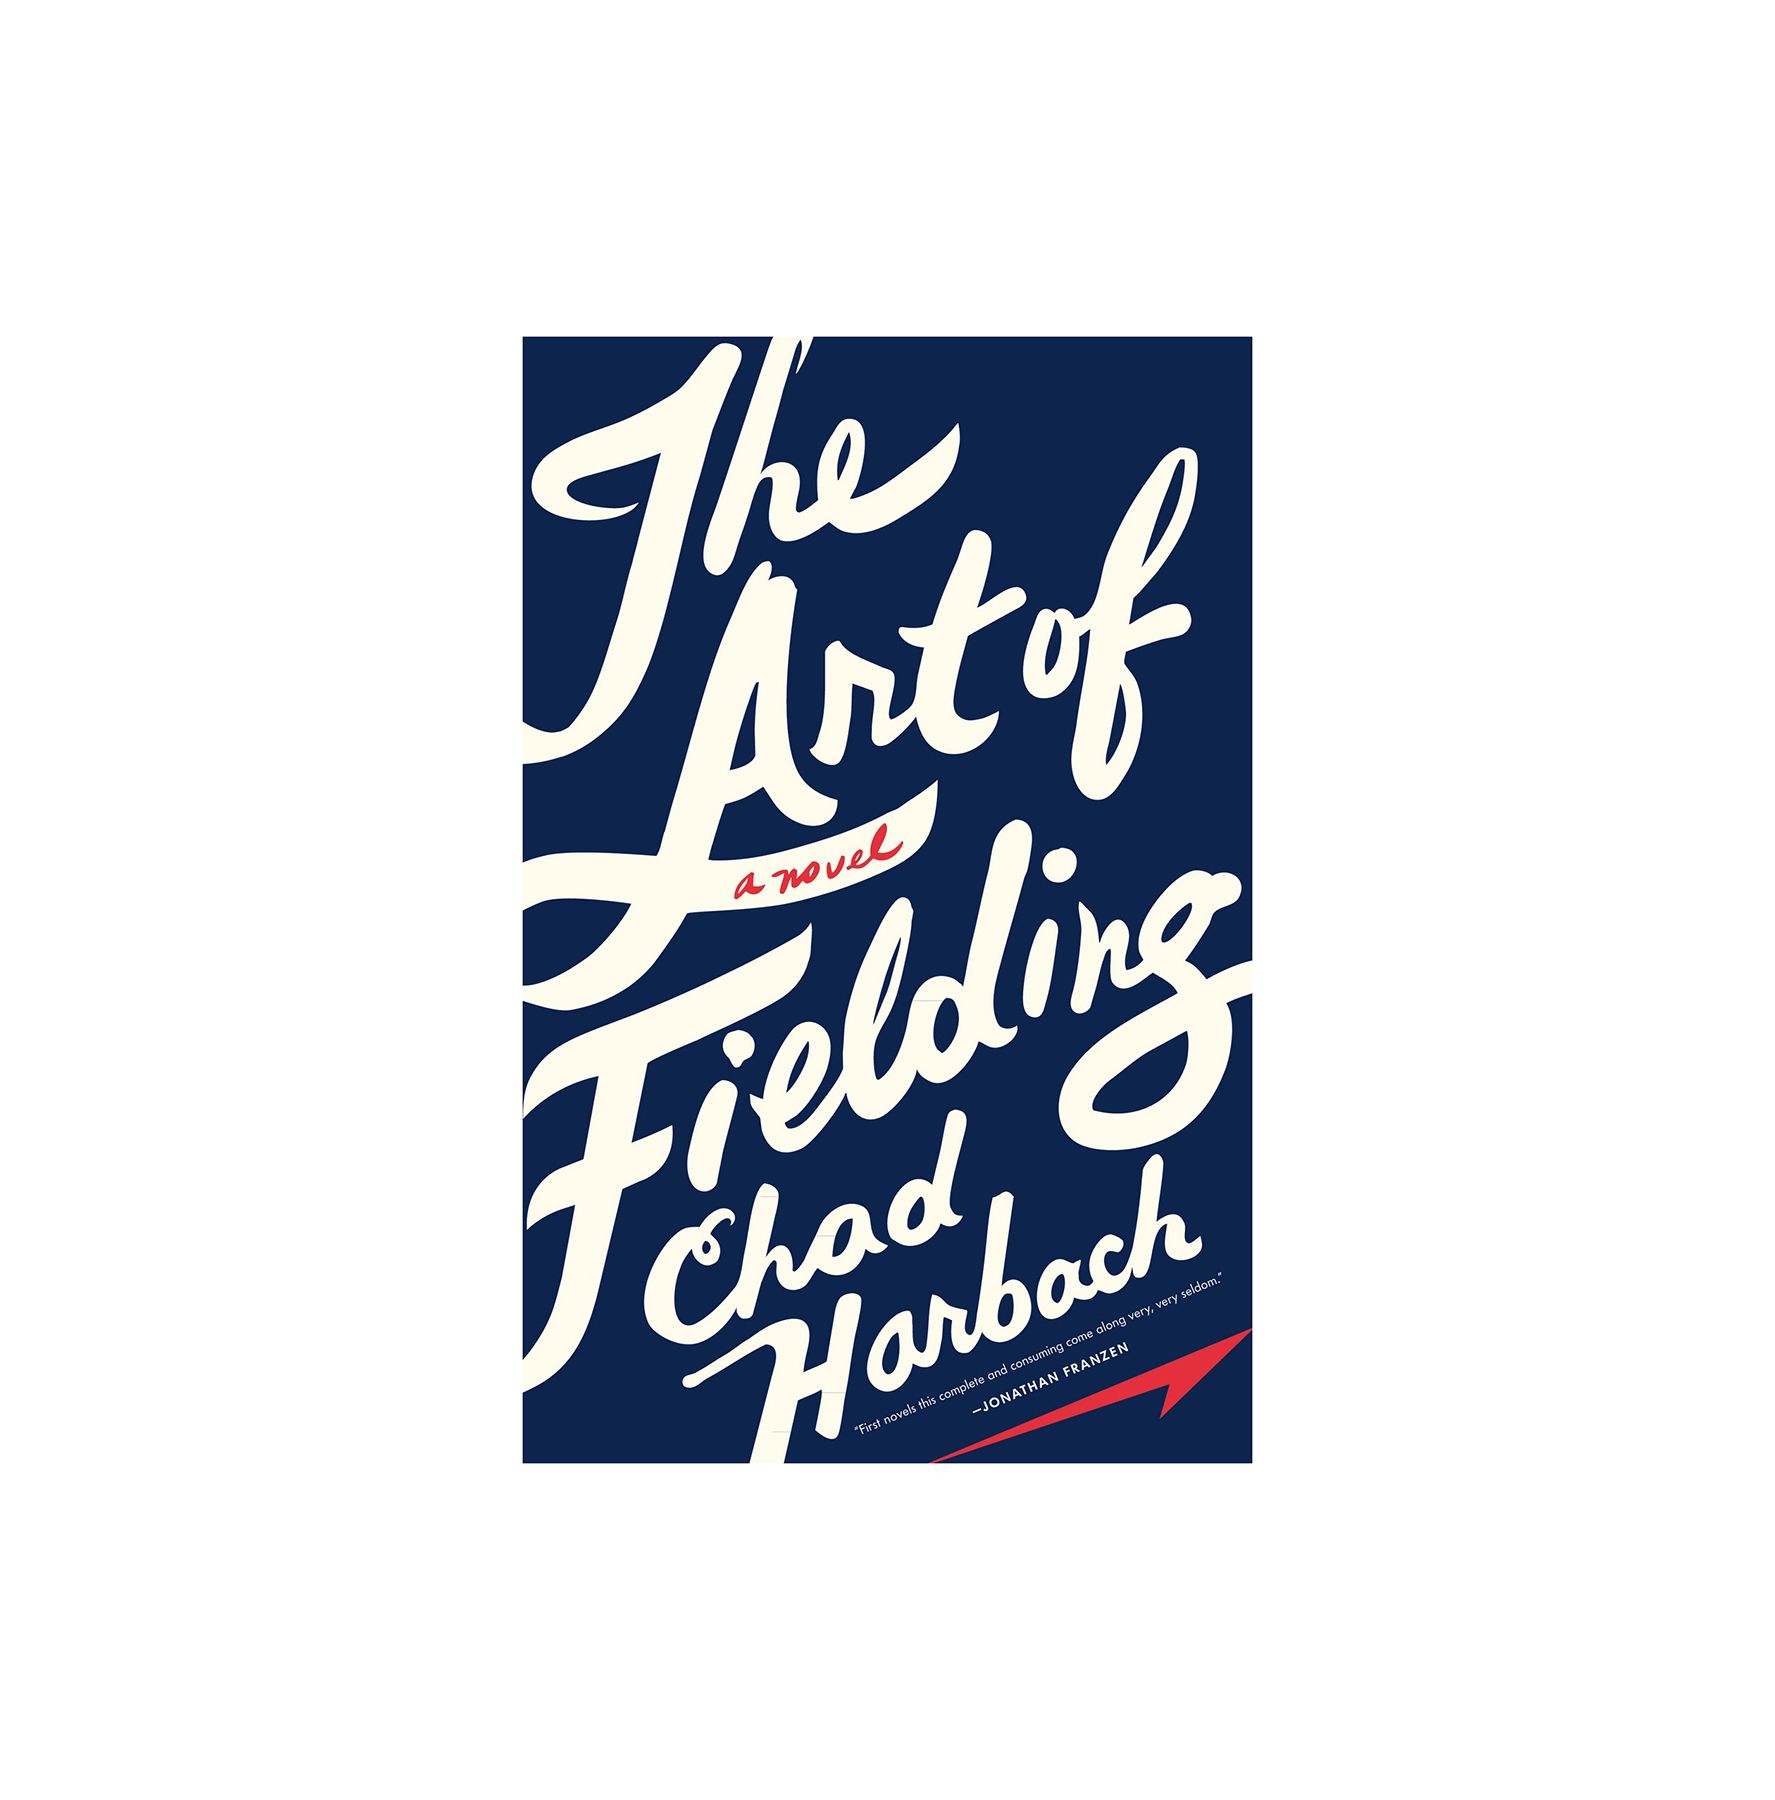 The Art of Fielding, af Chad Harbach